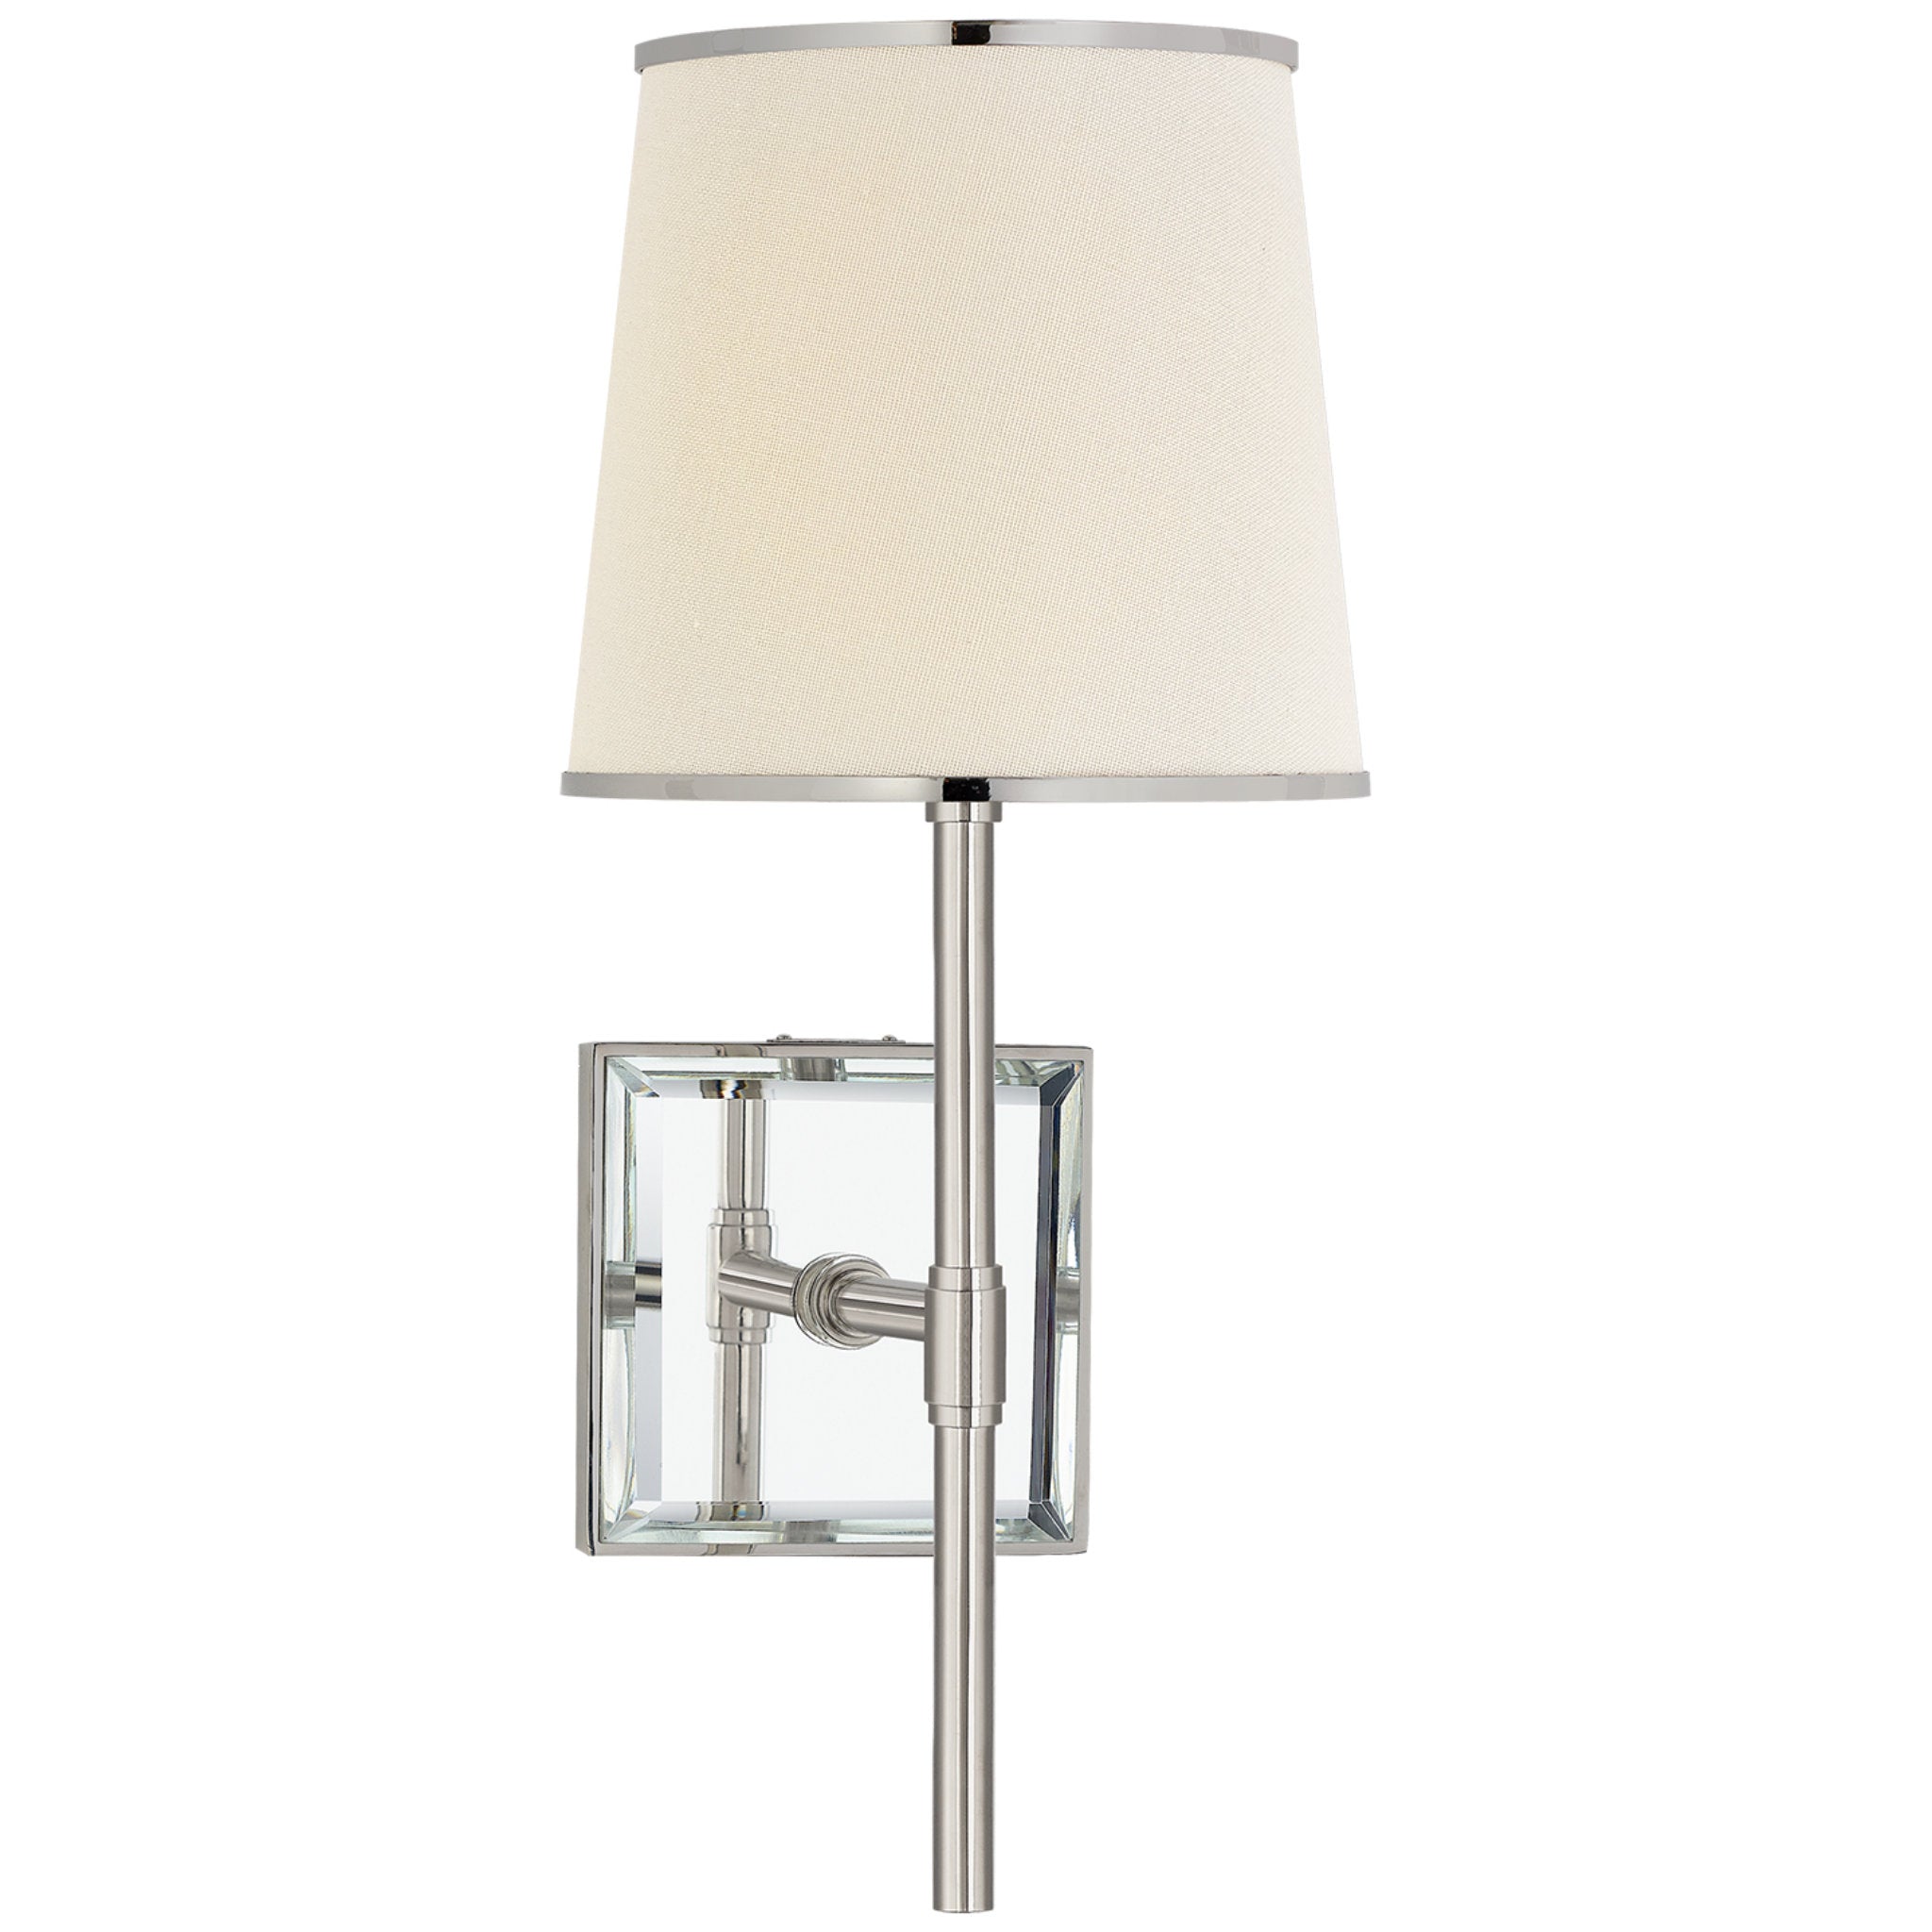 kate spade new york Bradford Medium Sconce in Polished Nickel and Mirror with Cream Linen Shade with Polished Nickel